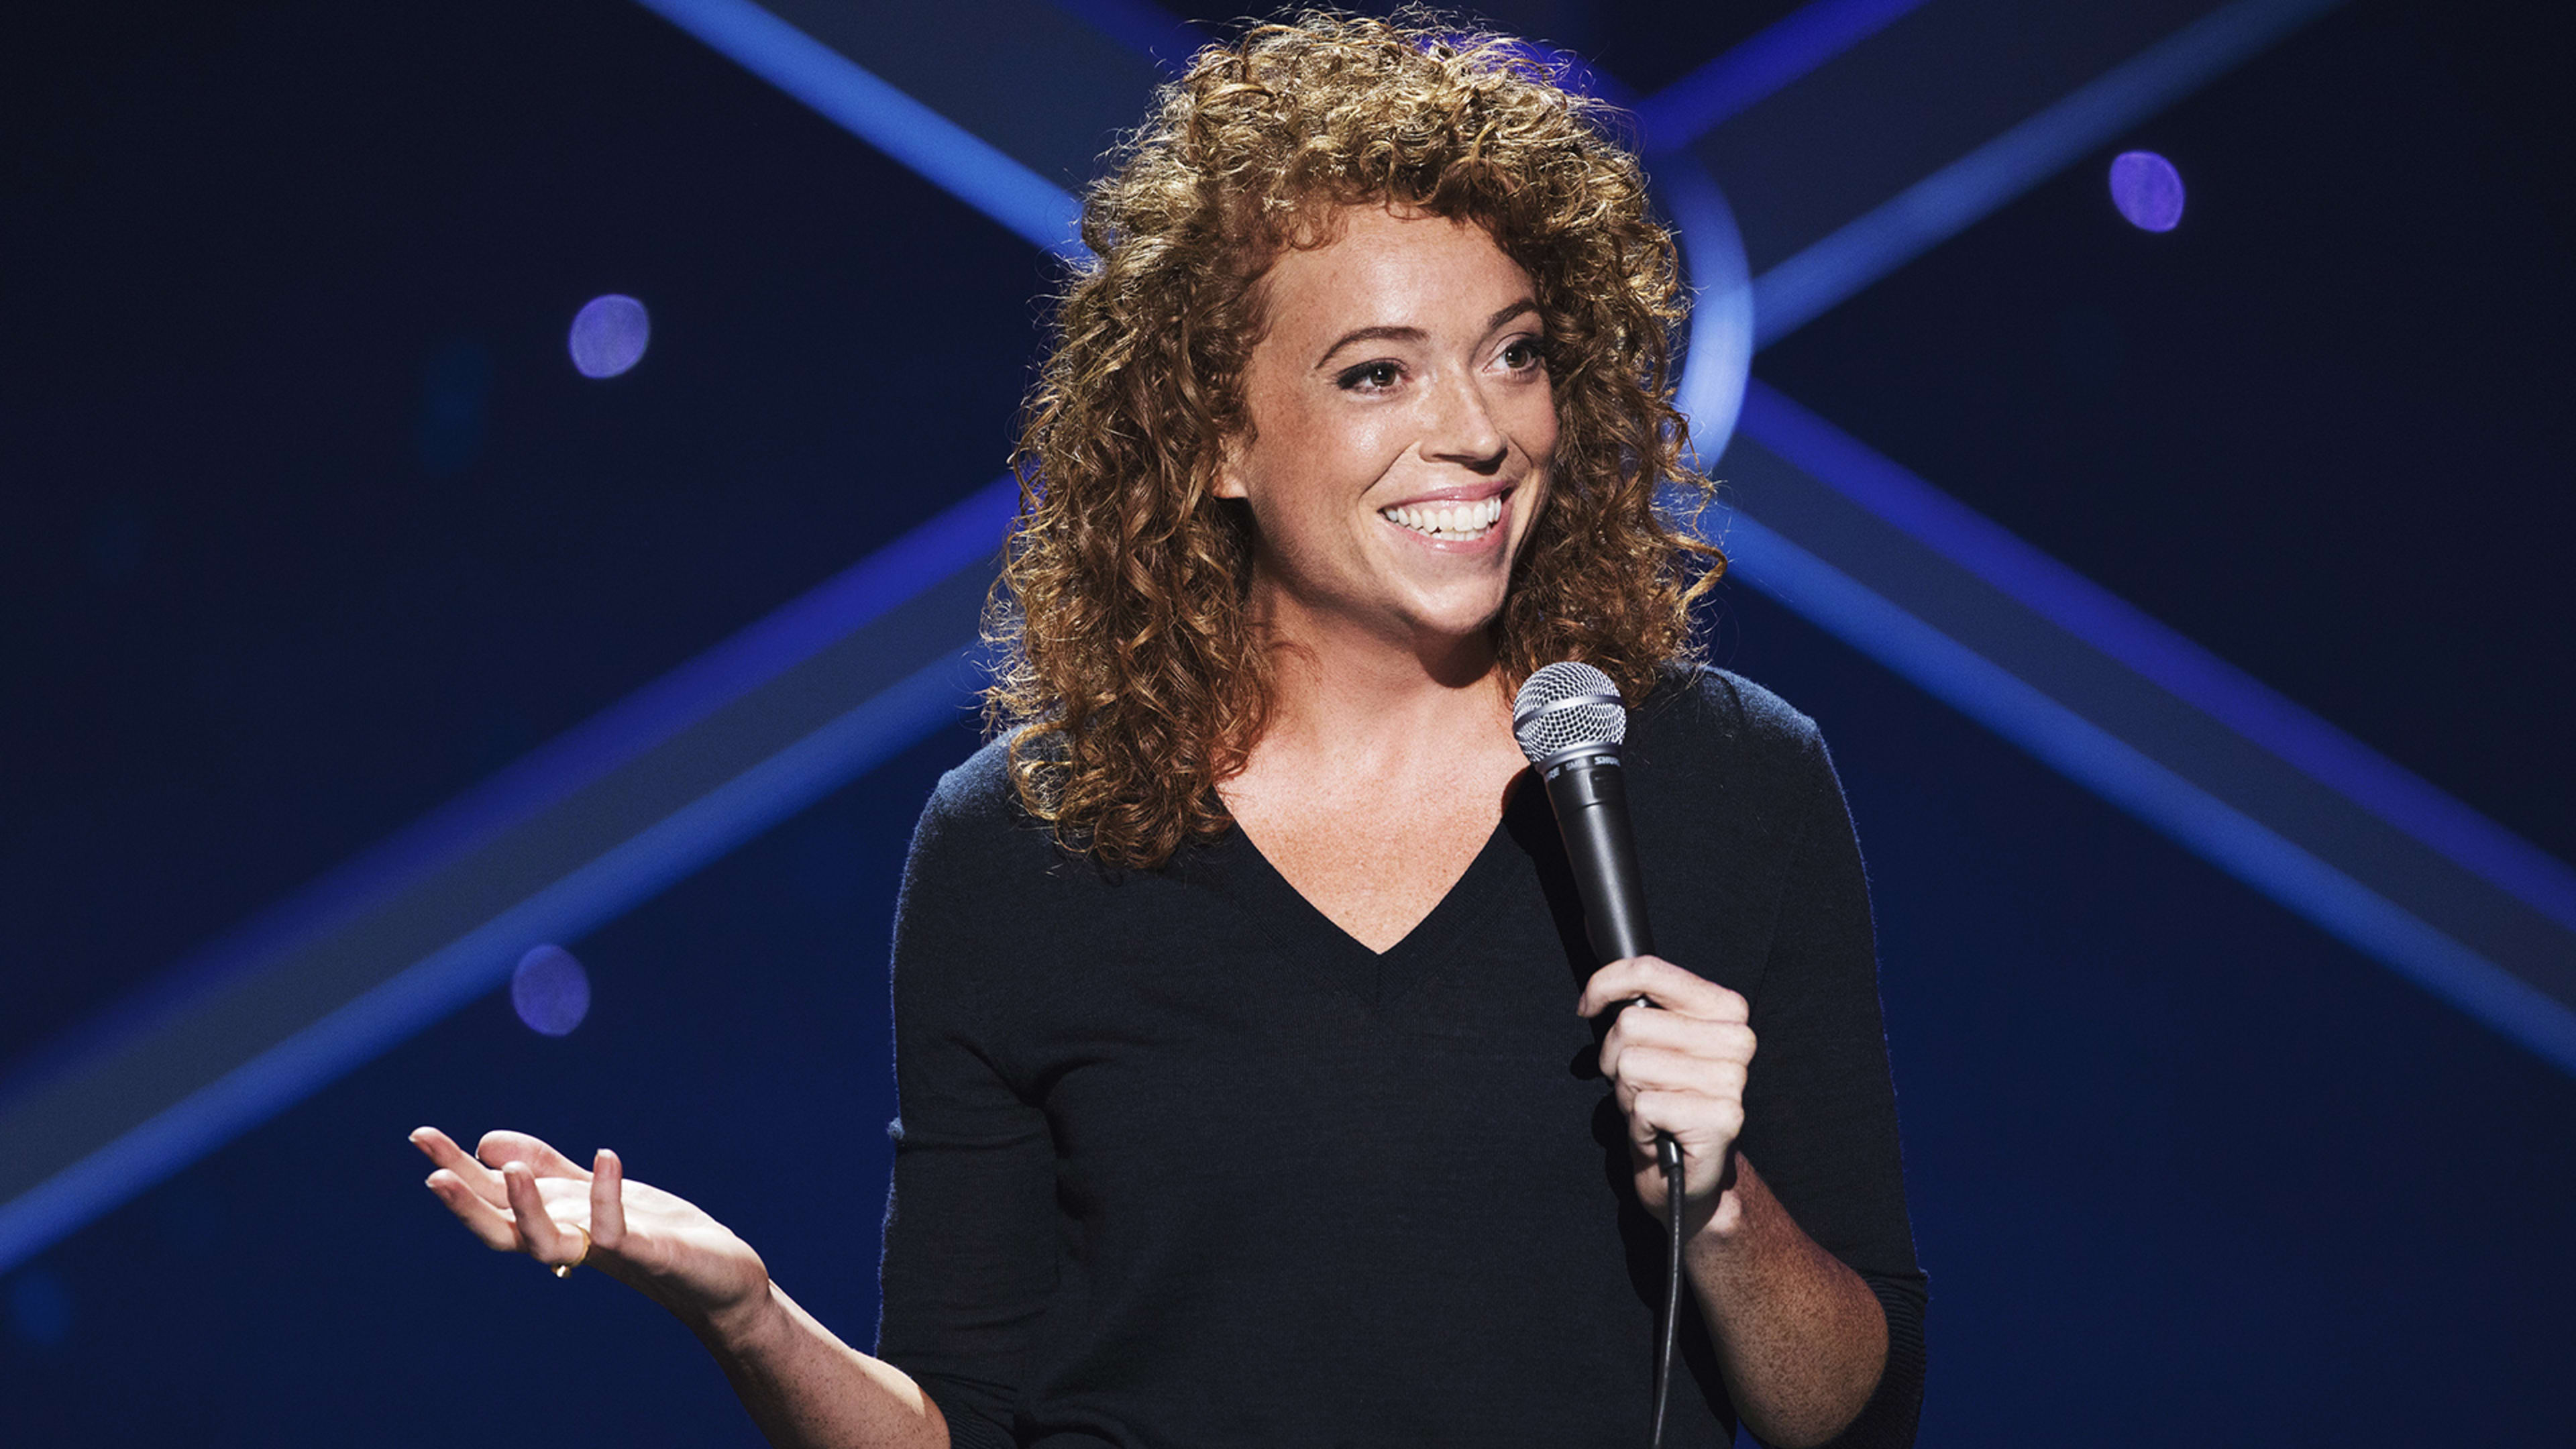 Michelle Wolf Of “The Daily Show” To Roast Trump At White House Correspondents’ Dinner